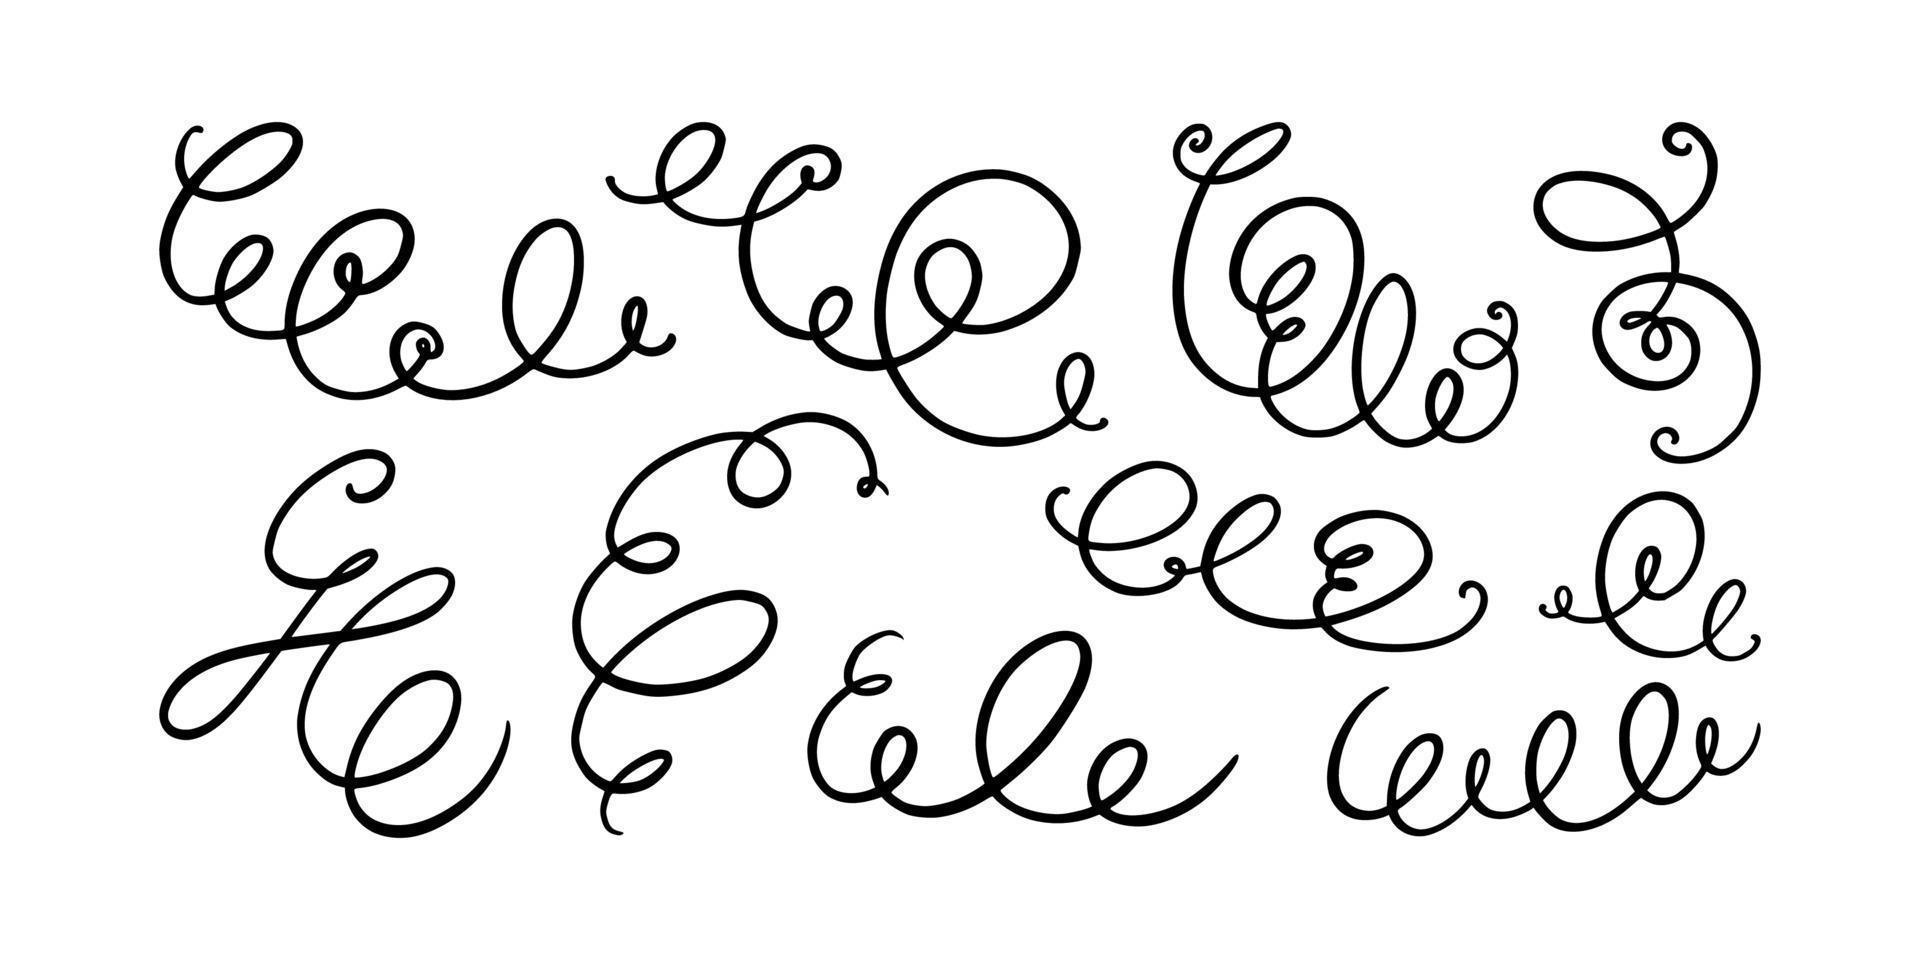 Squiggle and swirl lines. Set of hand drawn calligraphic swirls. Vector illustration